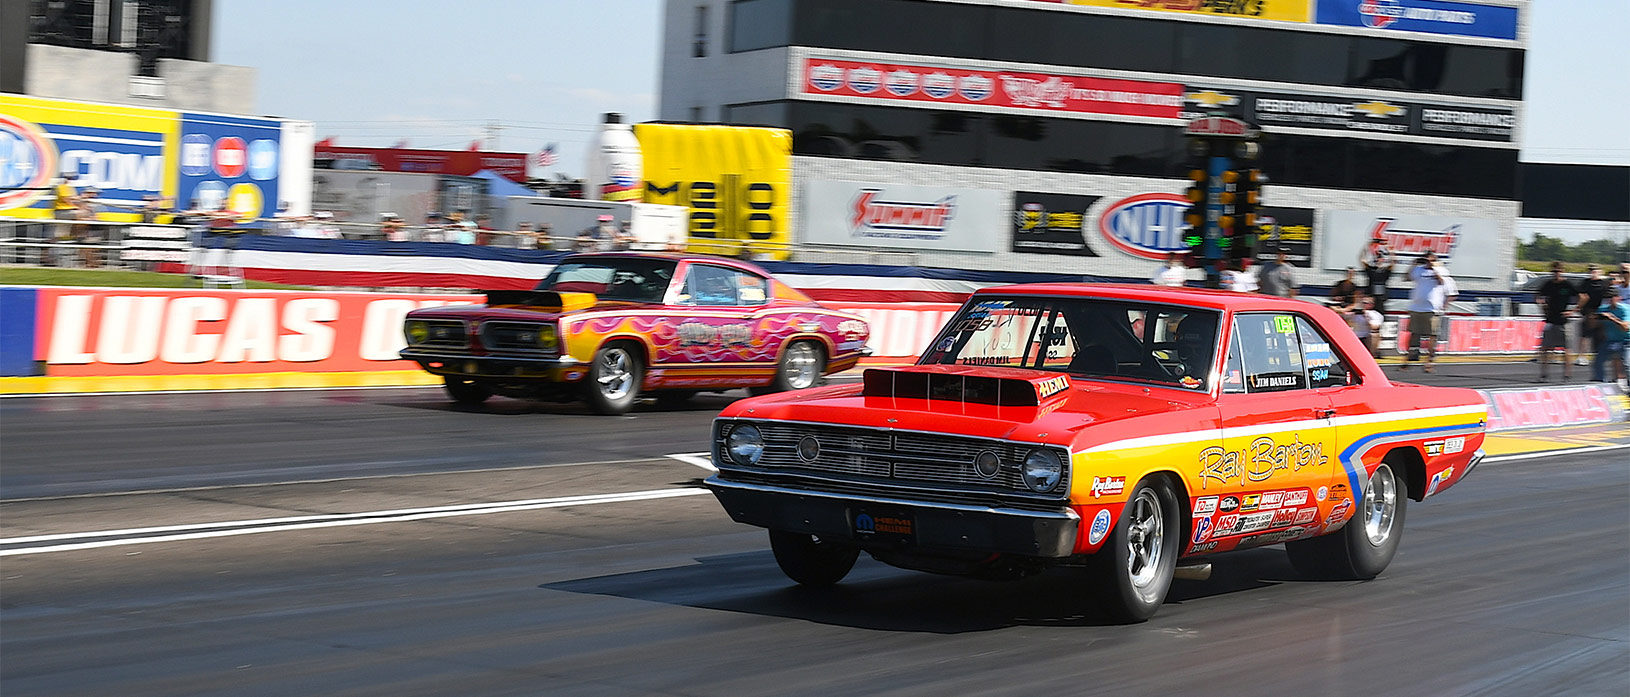 dodge vehicles at the starting line of a drag strip